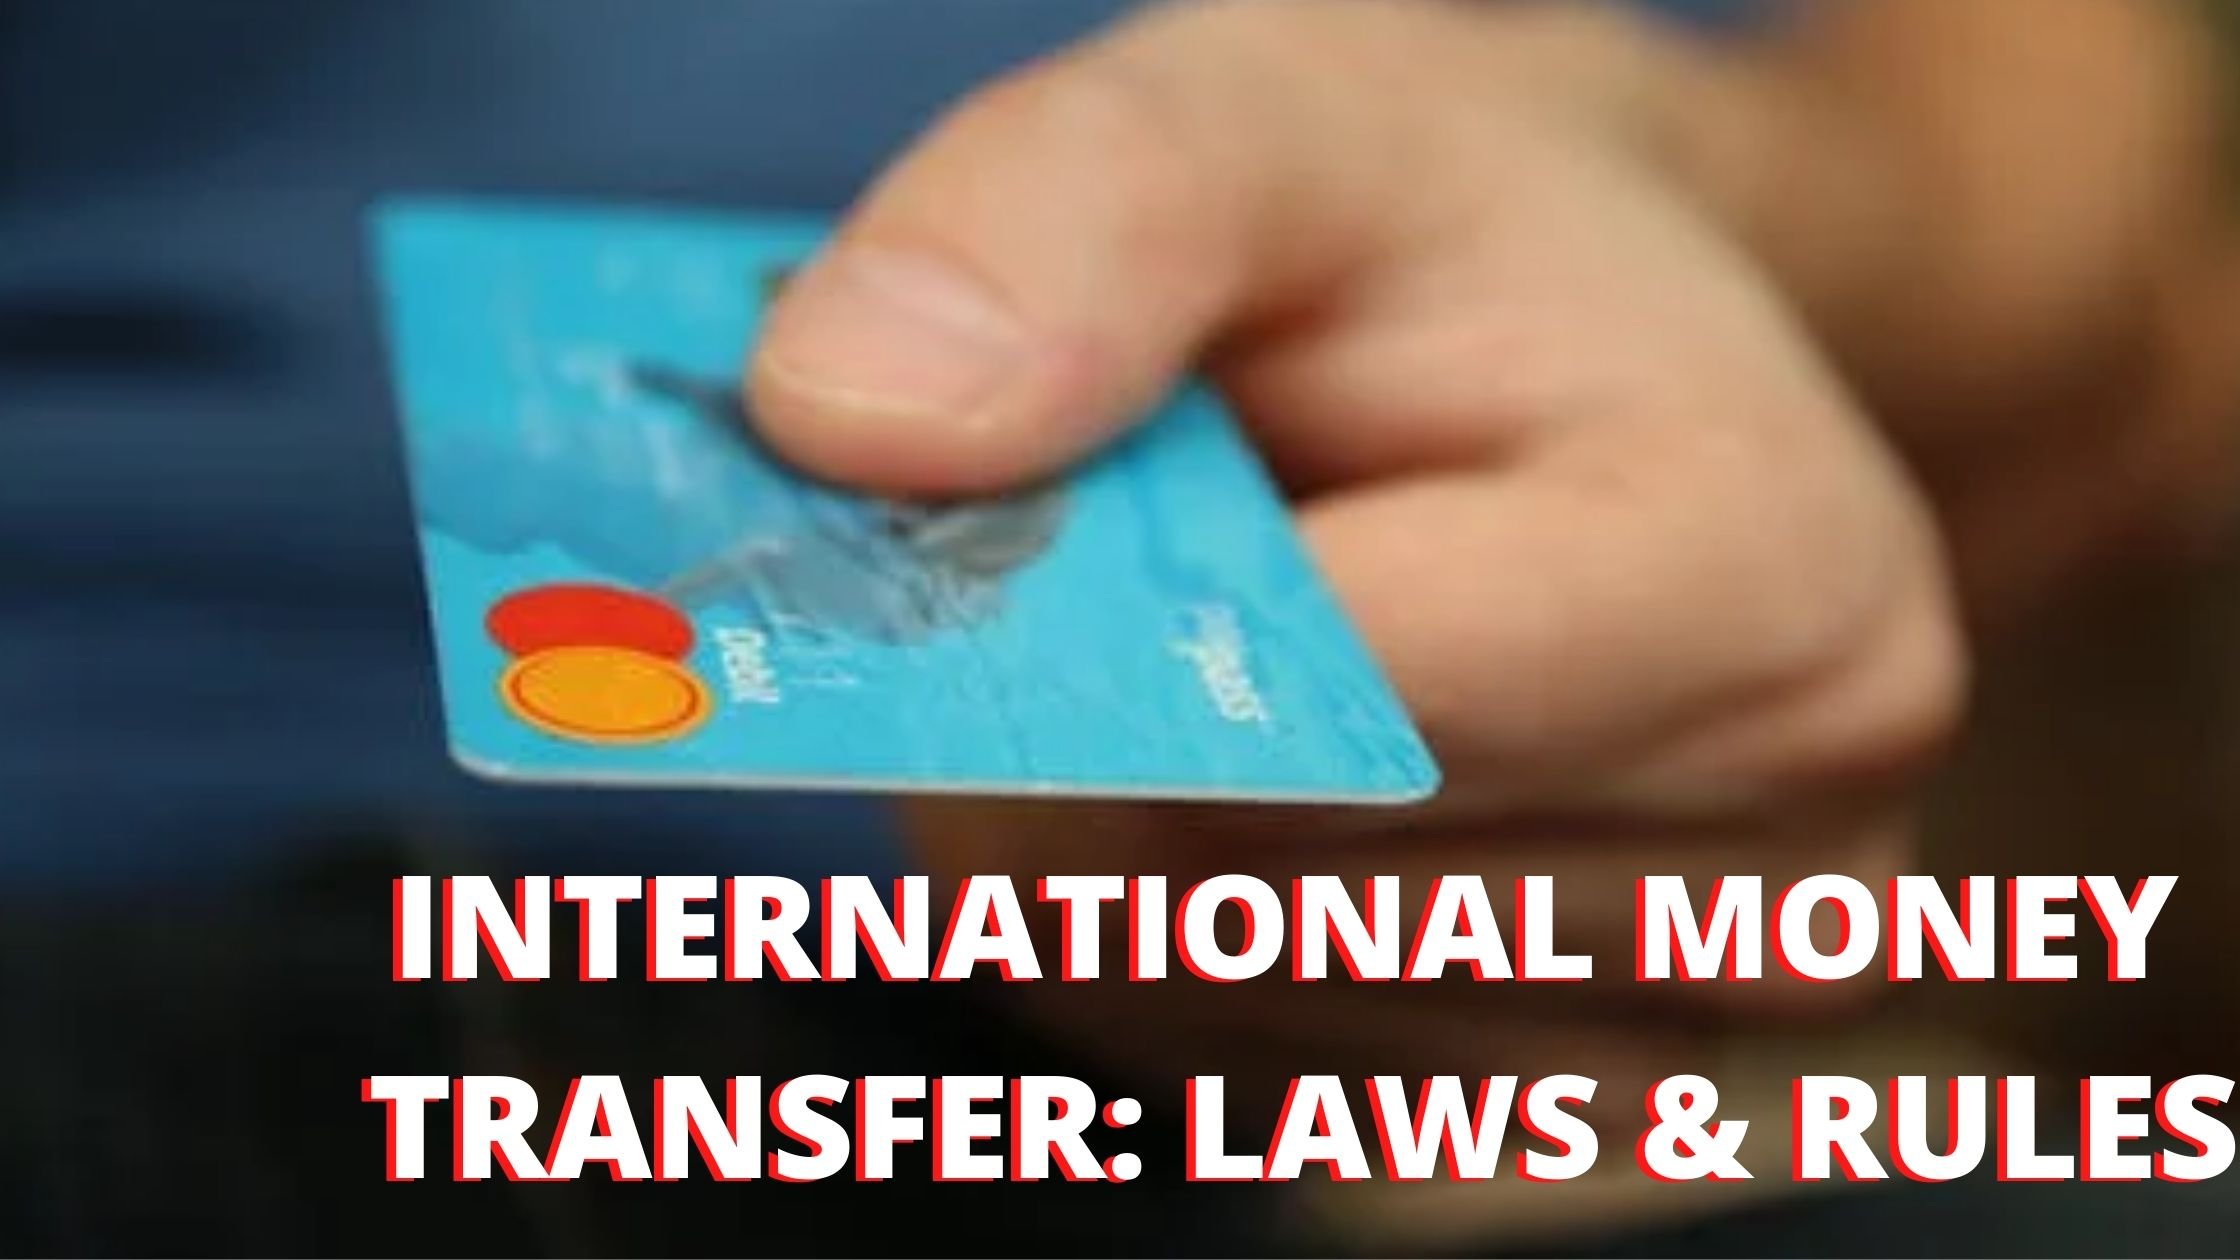 INTERNATIONAL MONEY TRANSFER: LAWS AND RULES